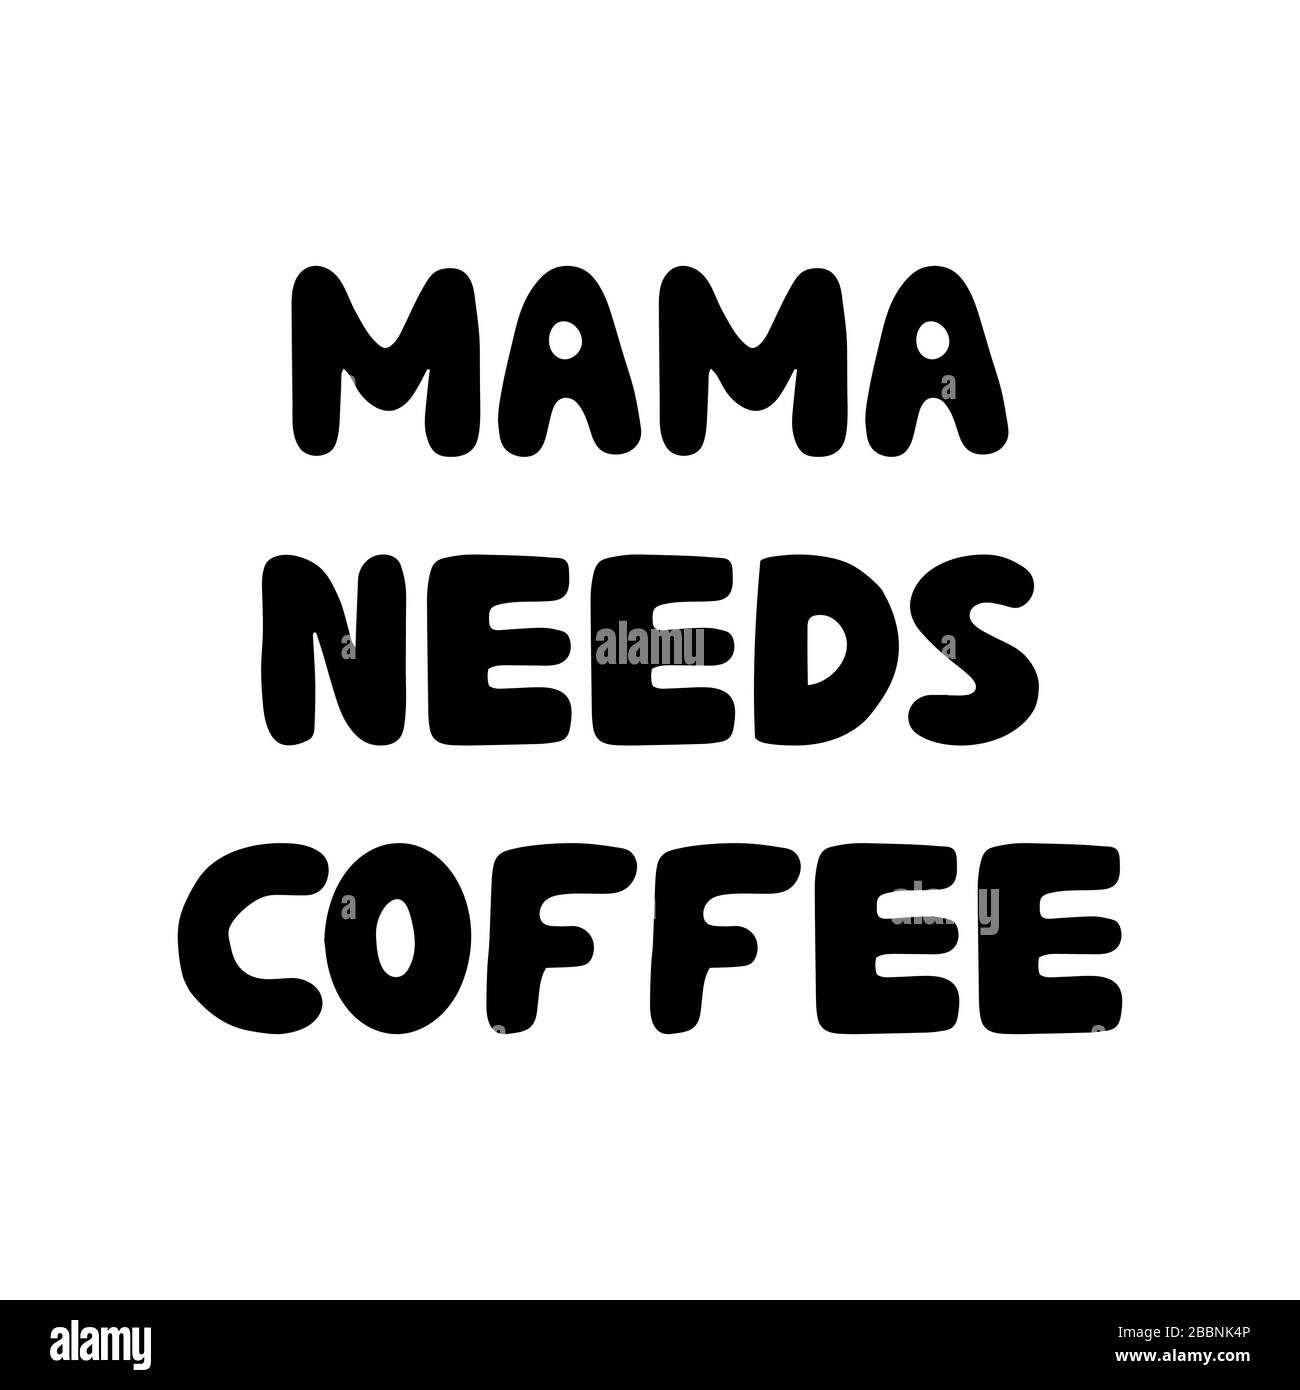 Mama needs coffee. Cute hand drawn bauble lettering. Isolated on white background. Stock illustration. Stock Vector